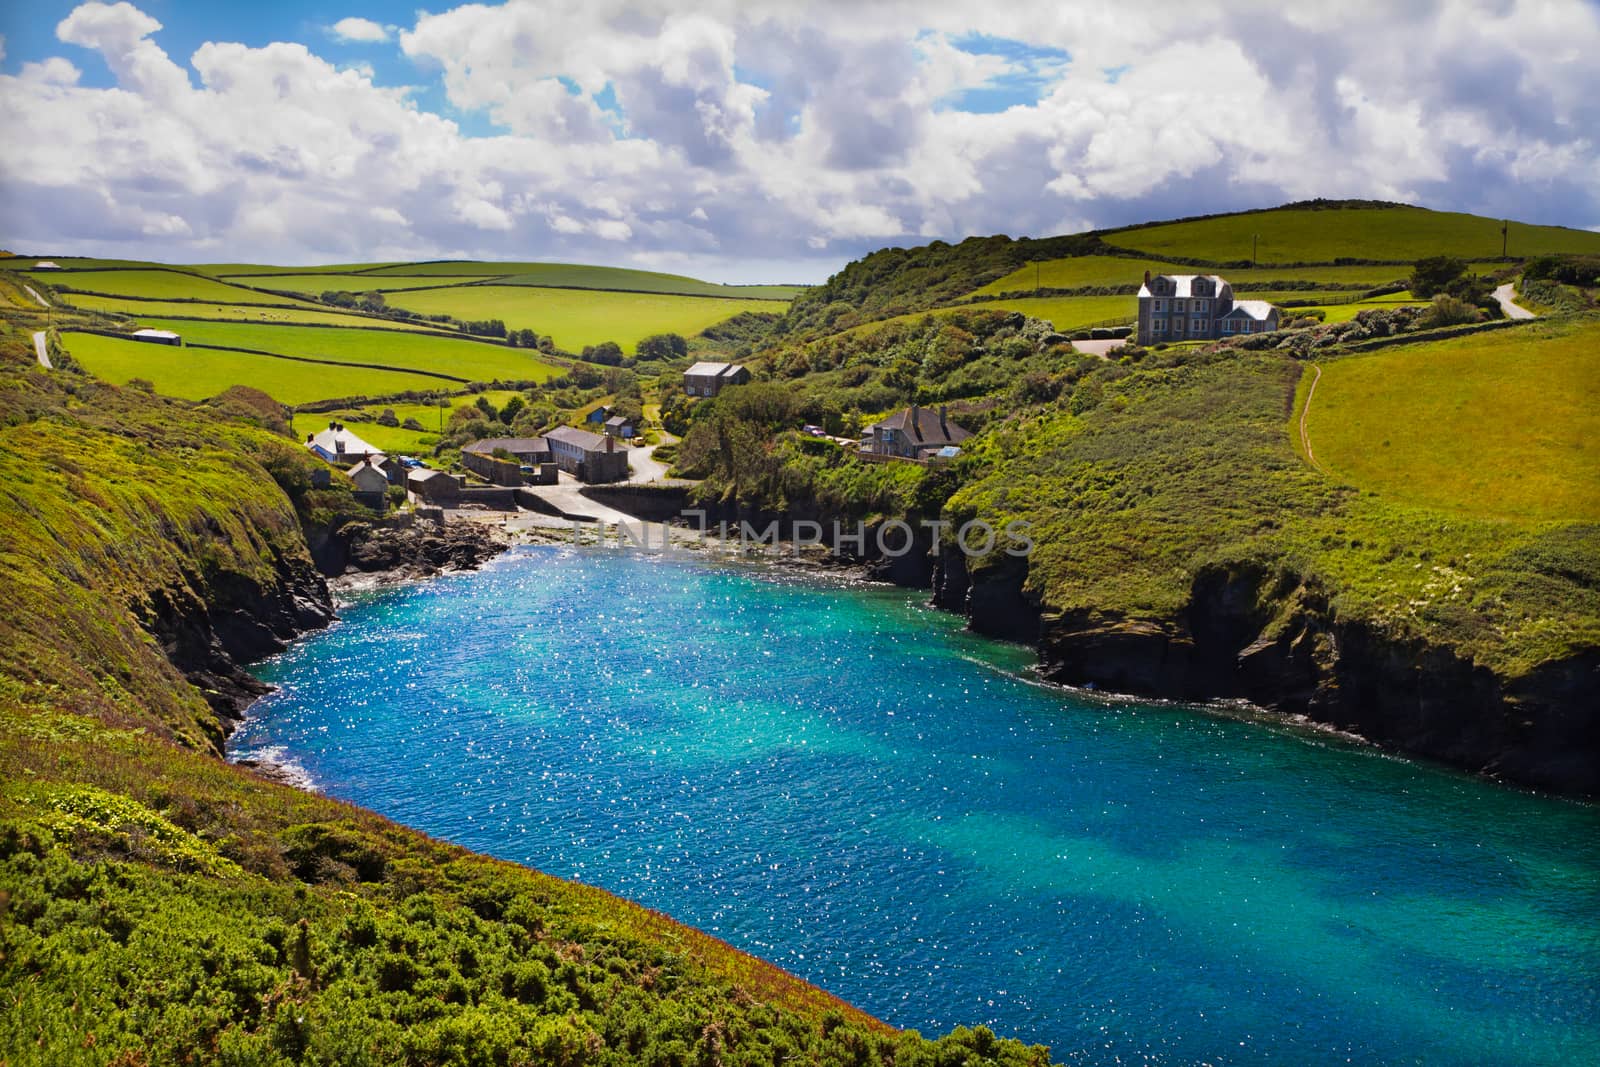 Cove at Port Quin, Cornwall, UK by fisfra